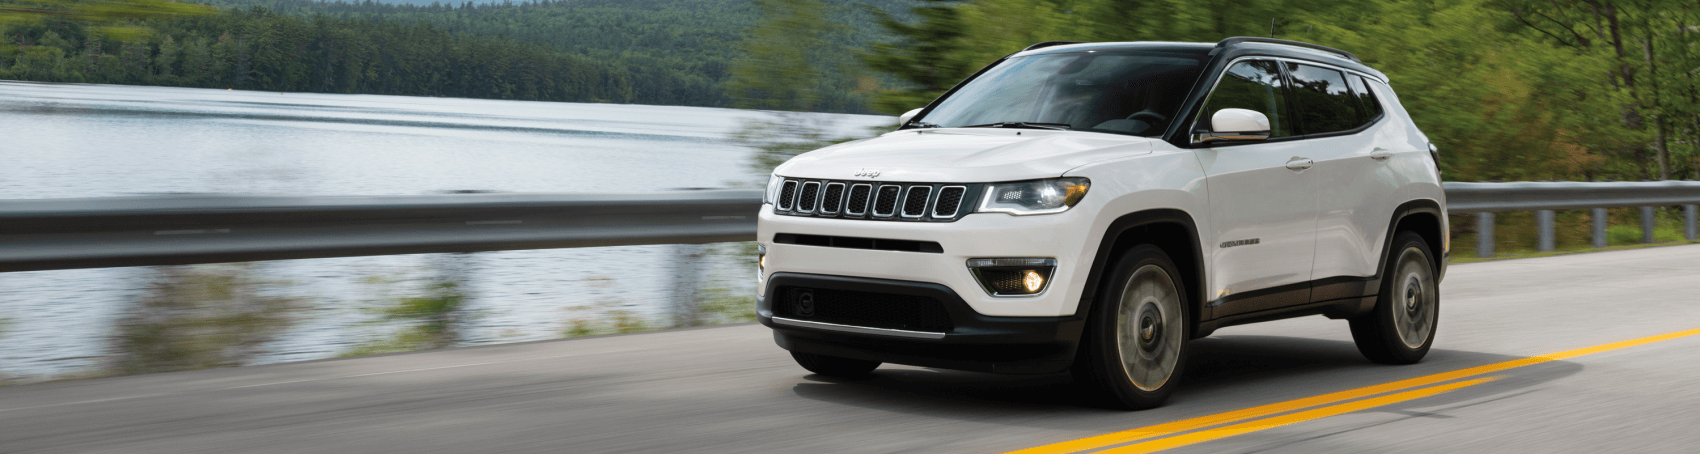 2021 Jeep Compass White Mountain Road